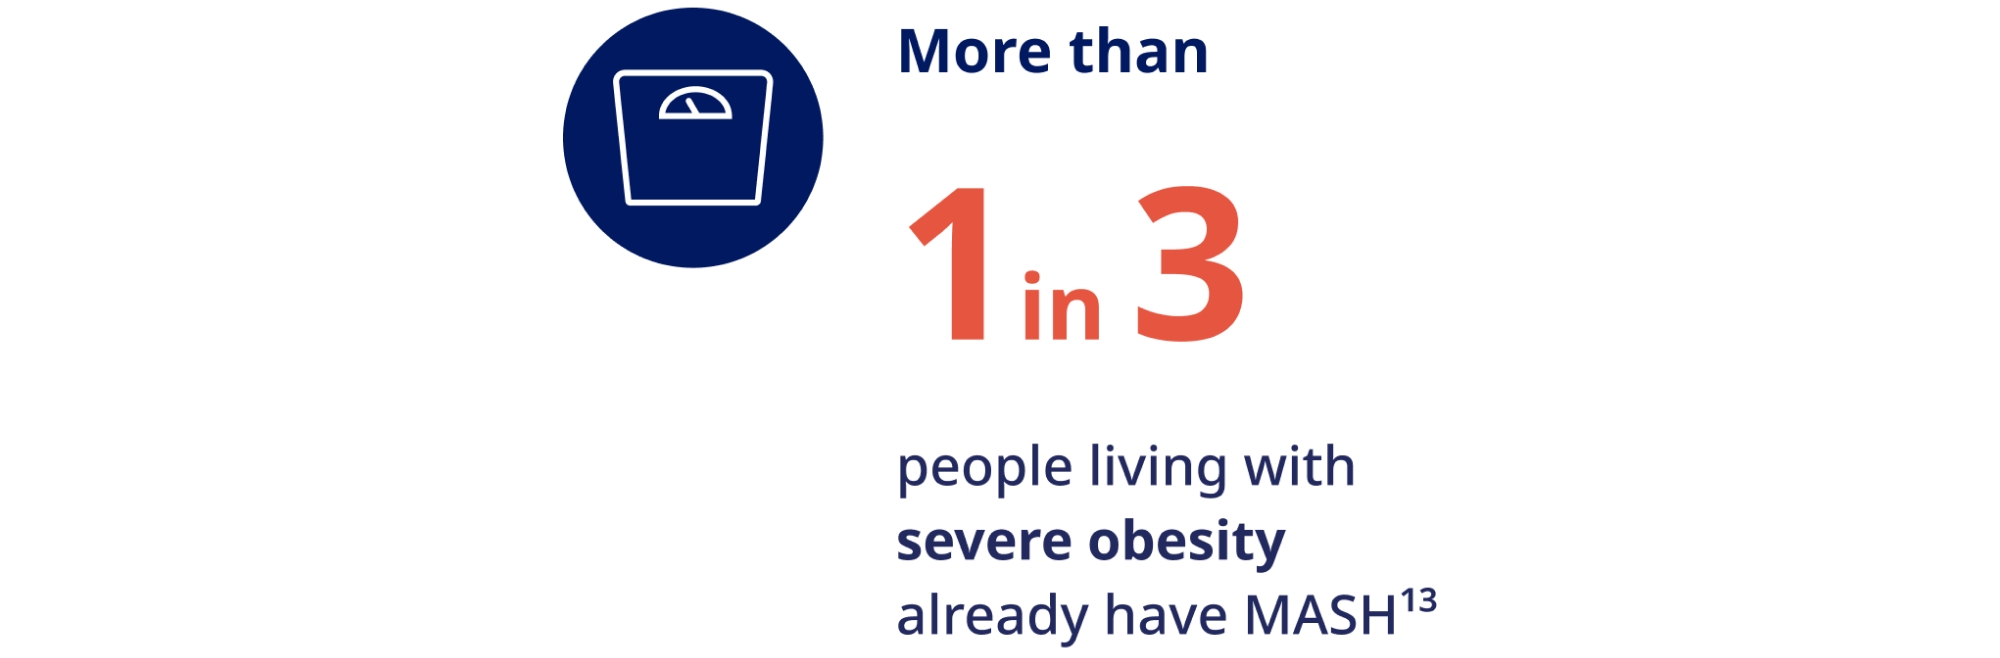 more than 1 in 3 people living with obesity